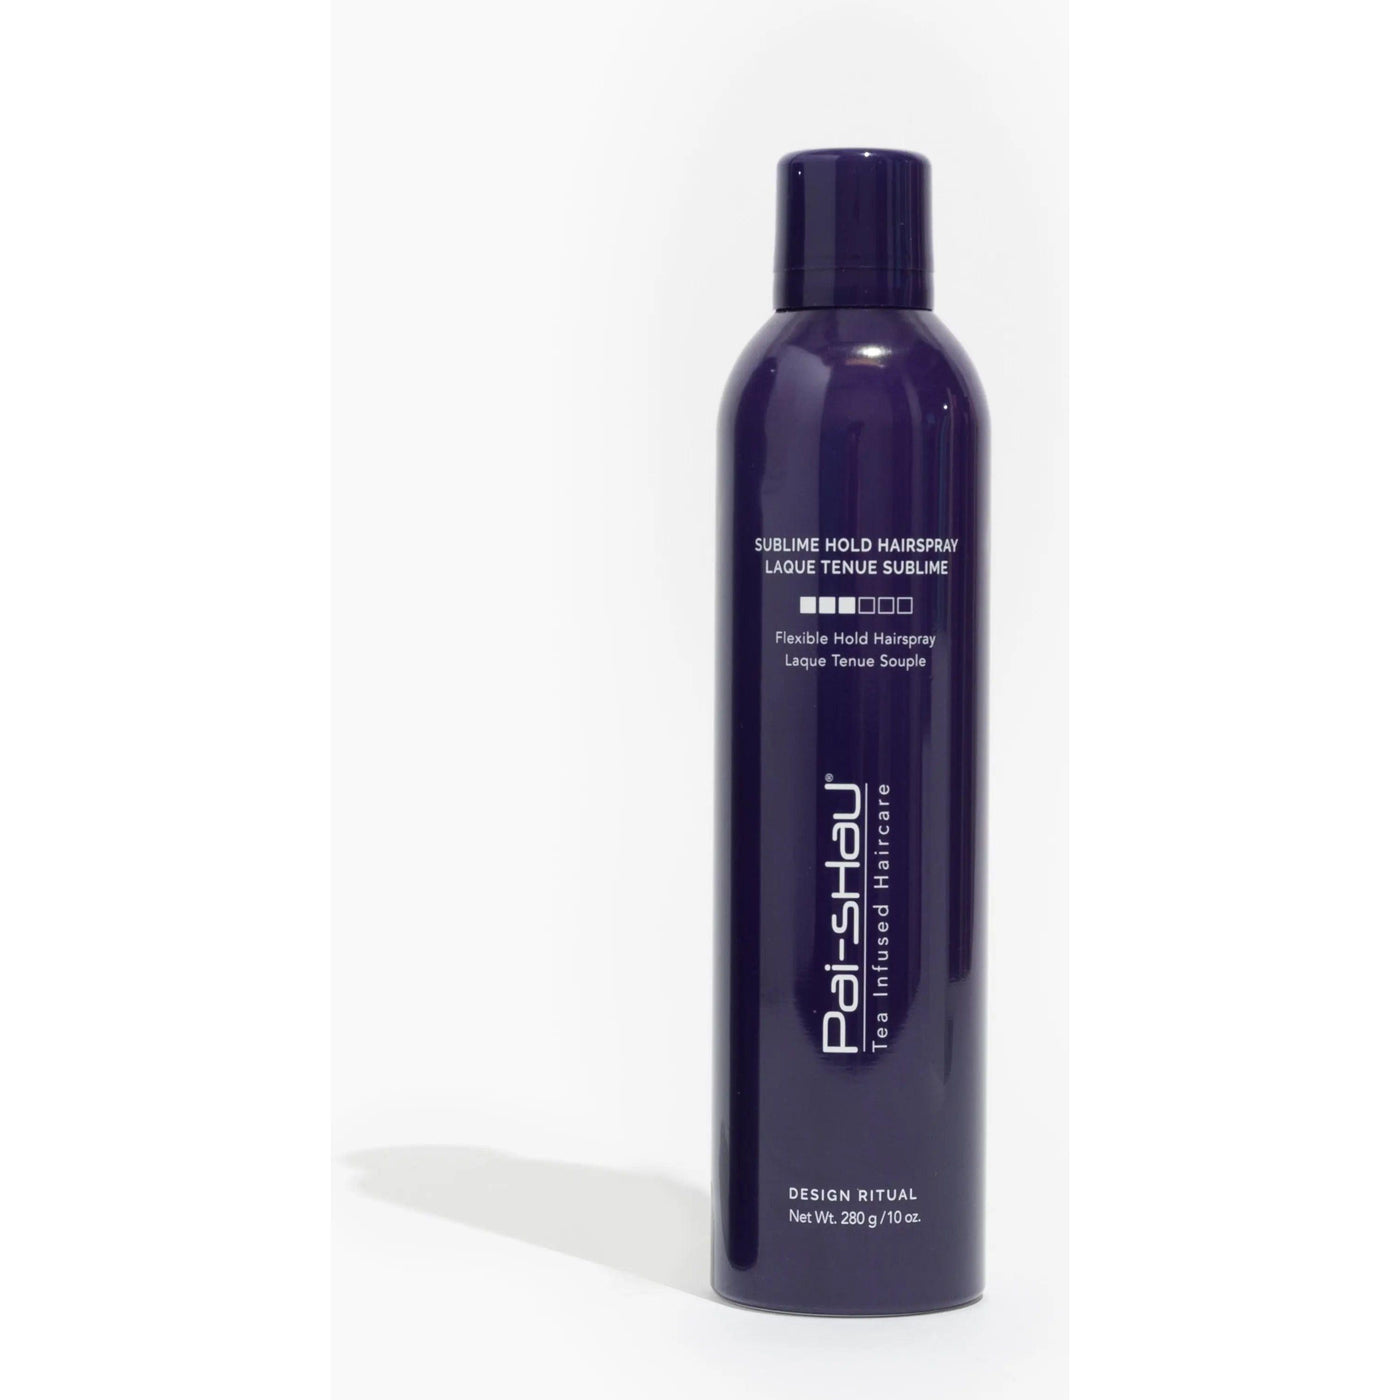 Sublime Hold Hairspray Pai-Shau Boutique Deauville